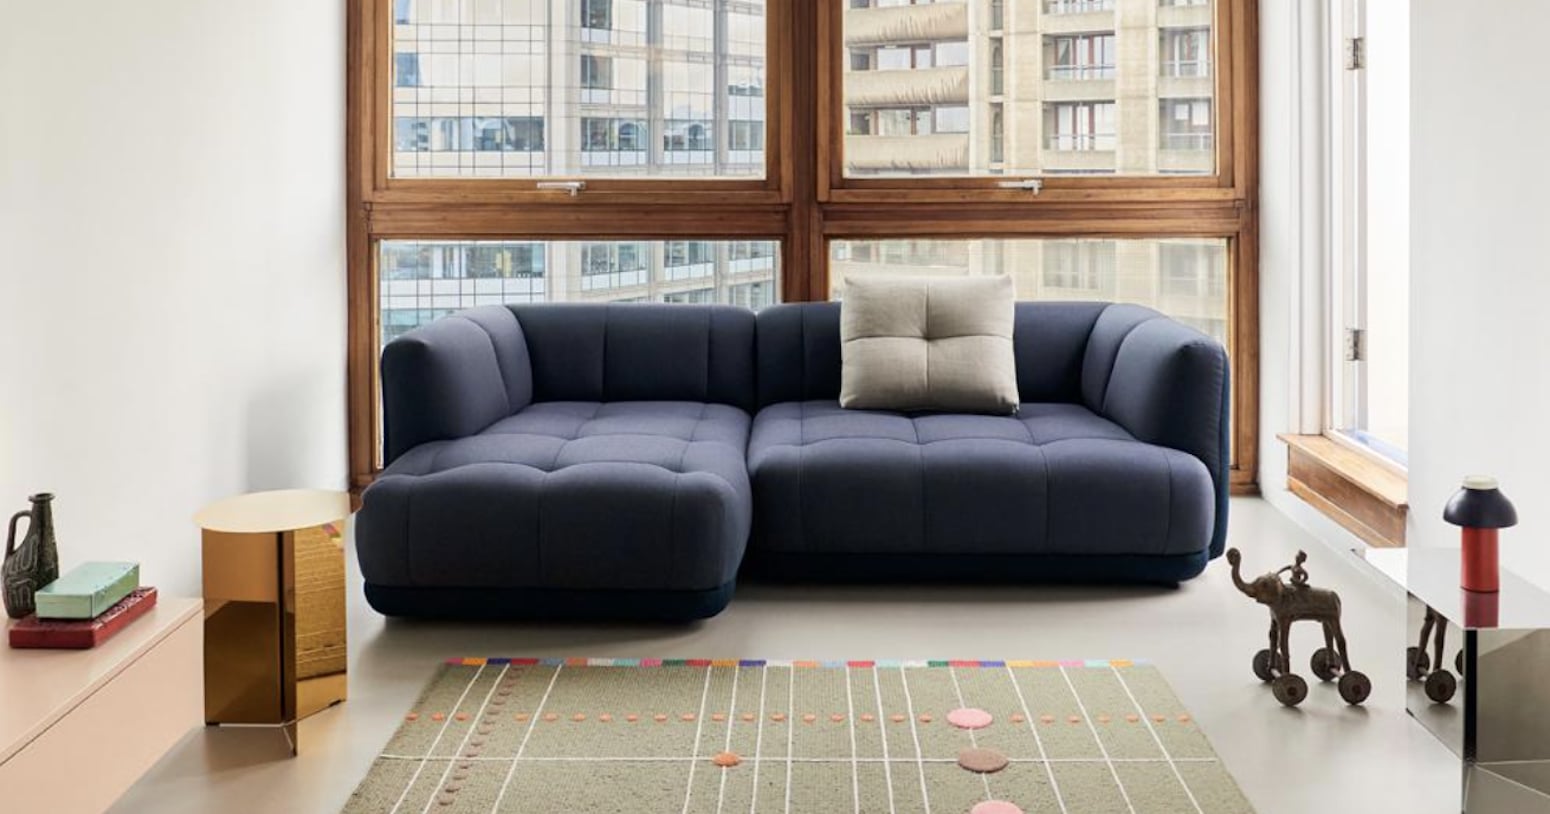 12 Stylish Top-Selling Floor Sofas We Would Buy